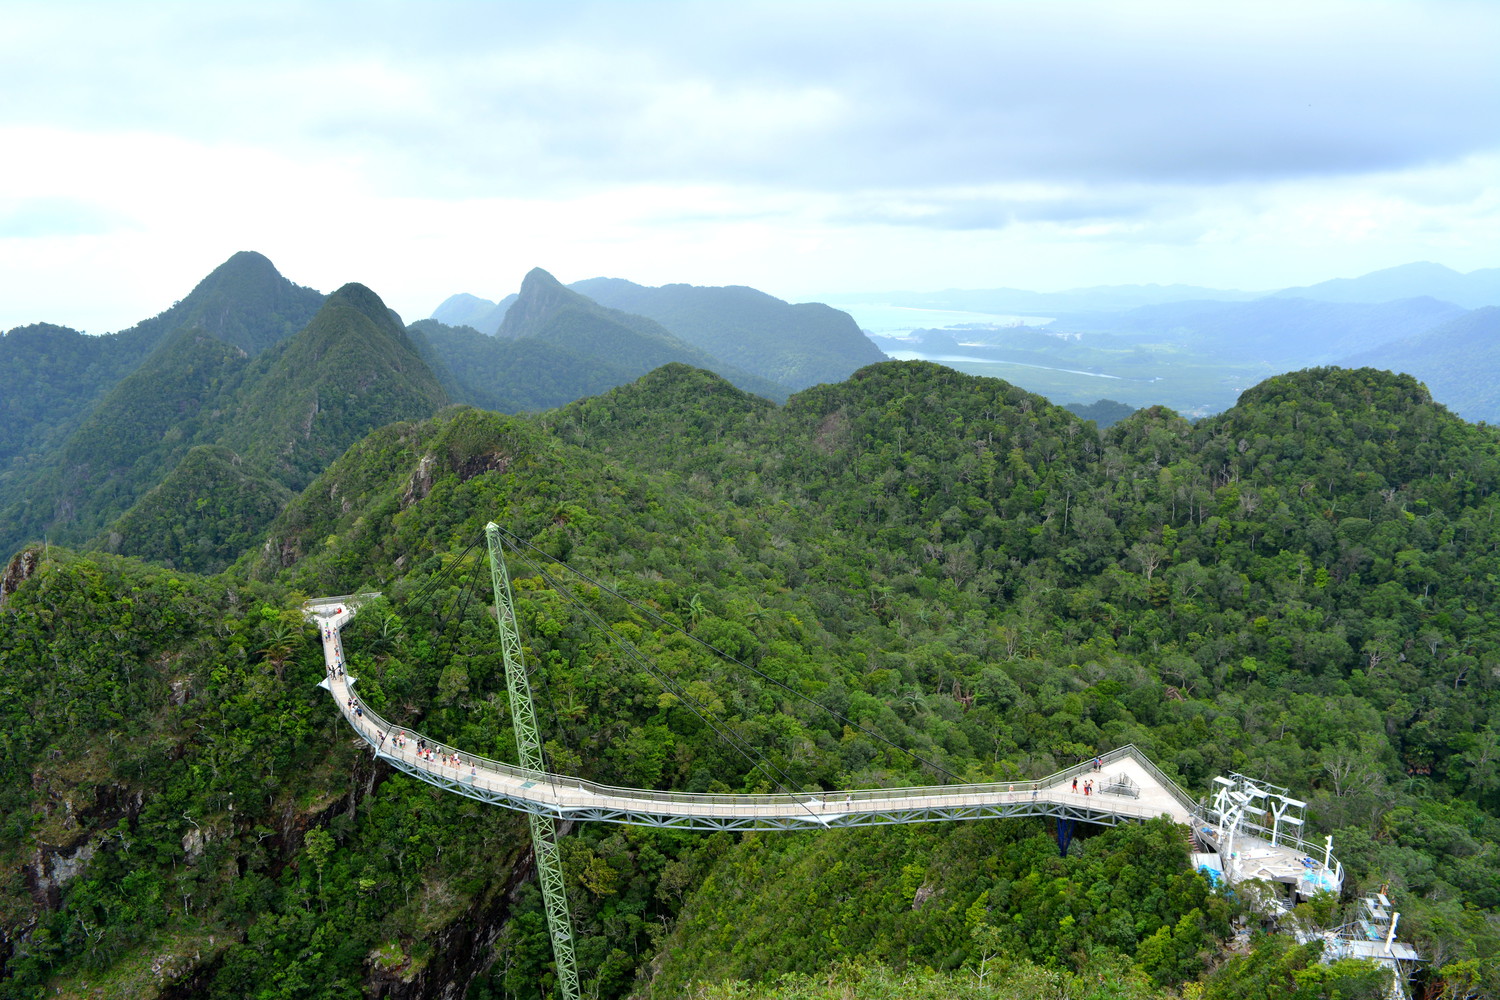 A curved walkway on a sky bridge that connects two hilltops of a mountain range